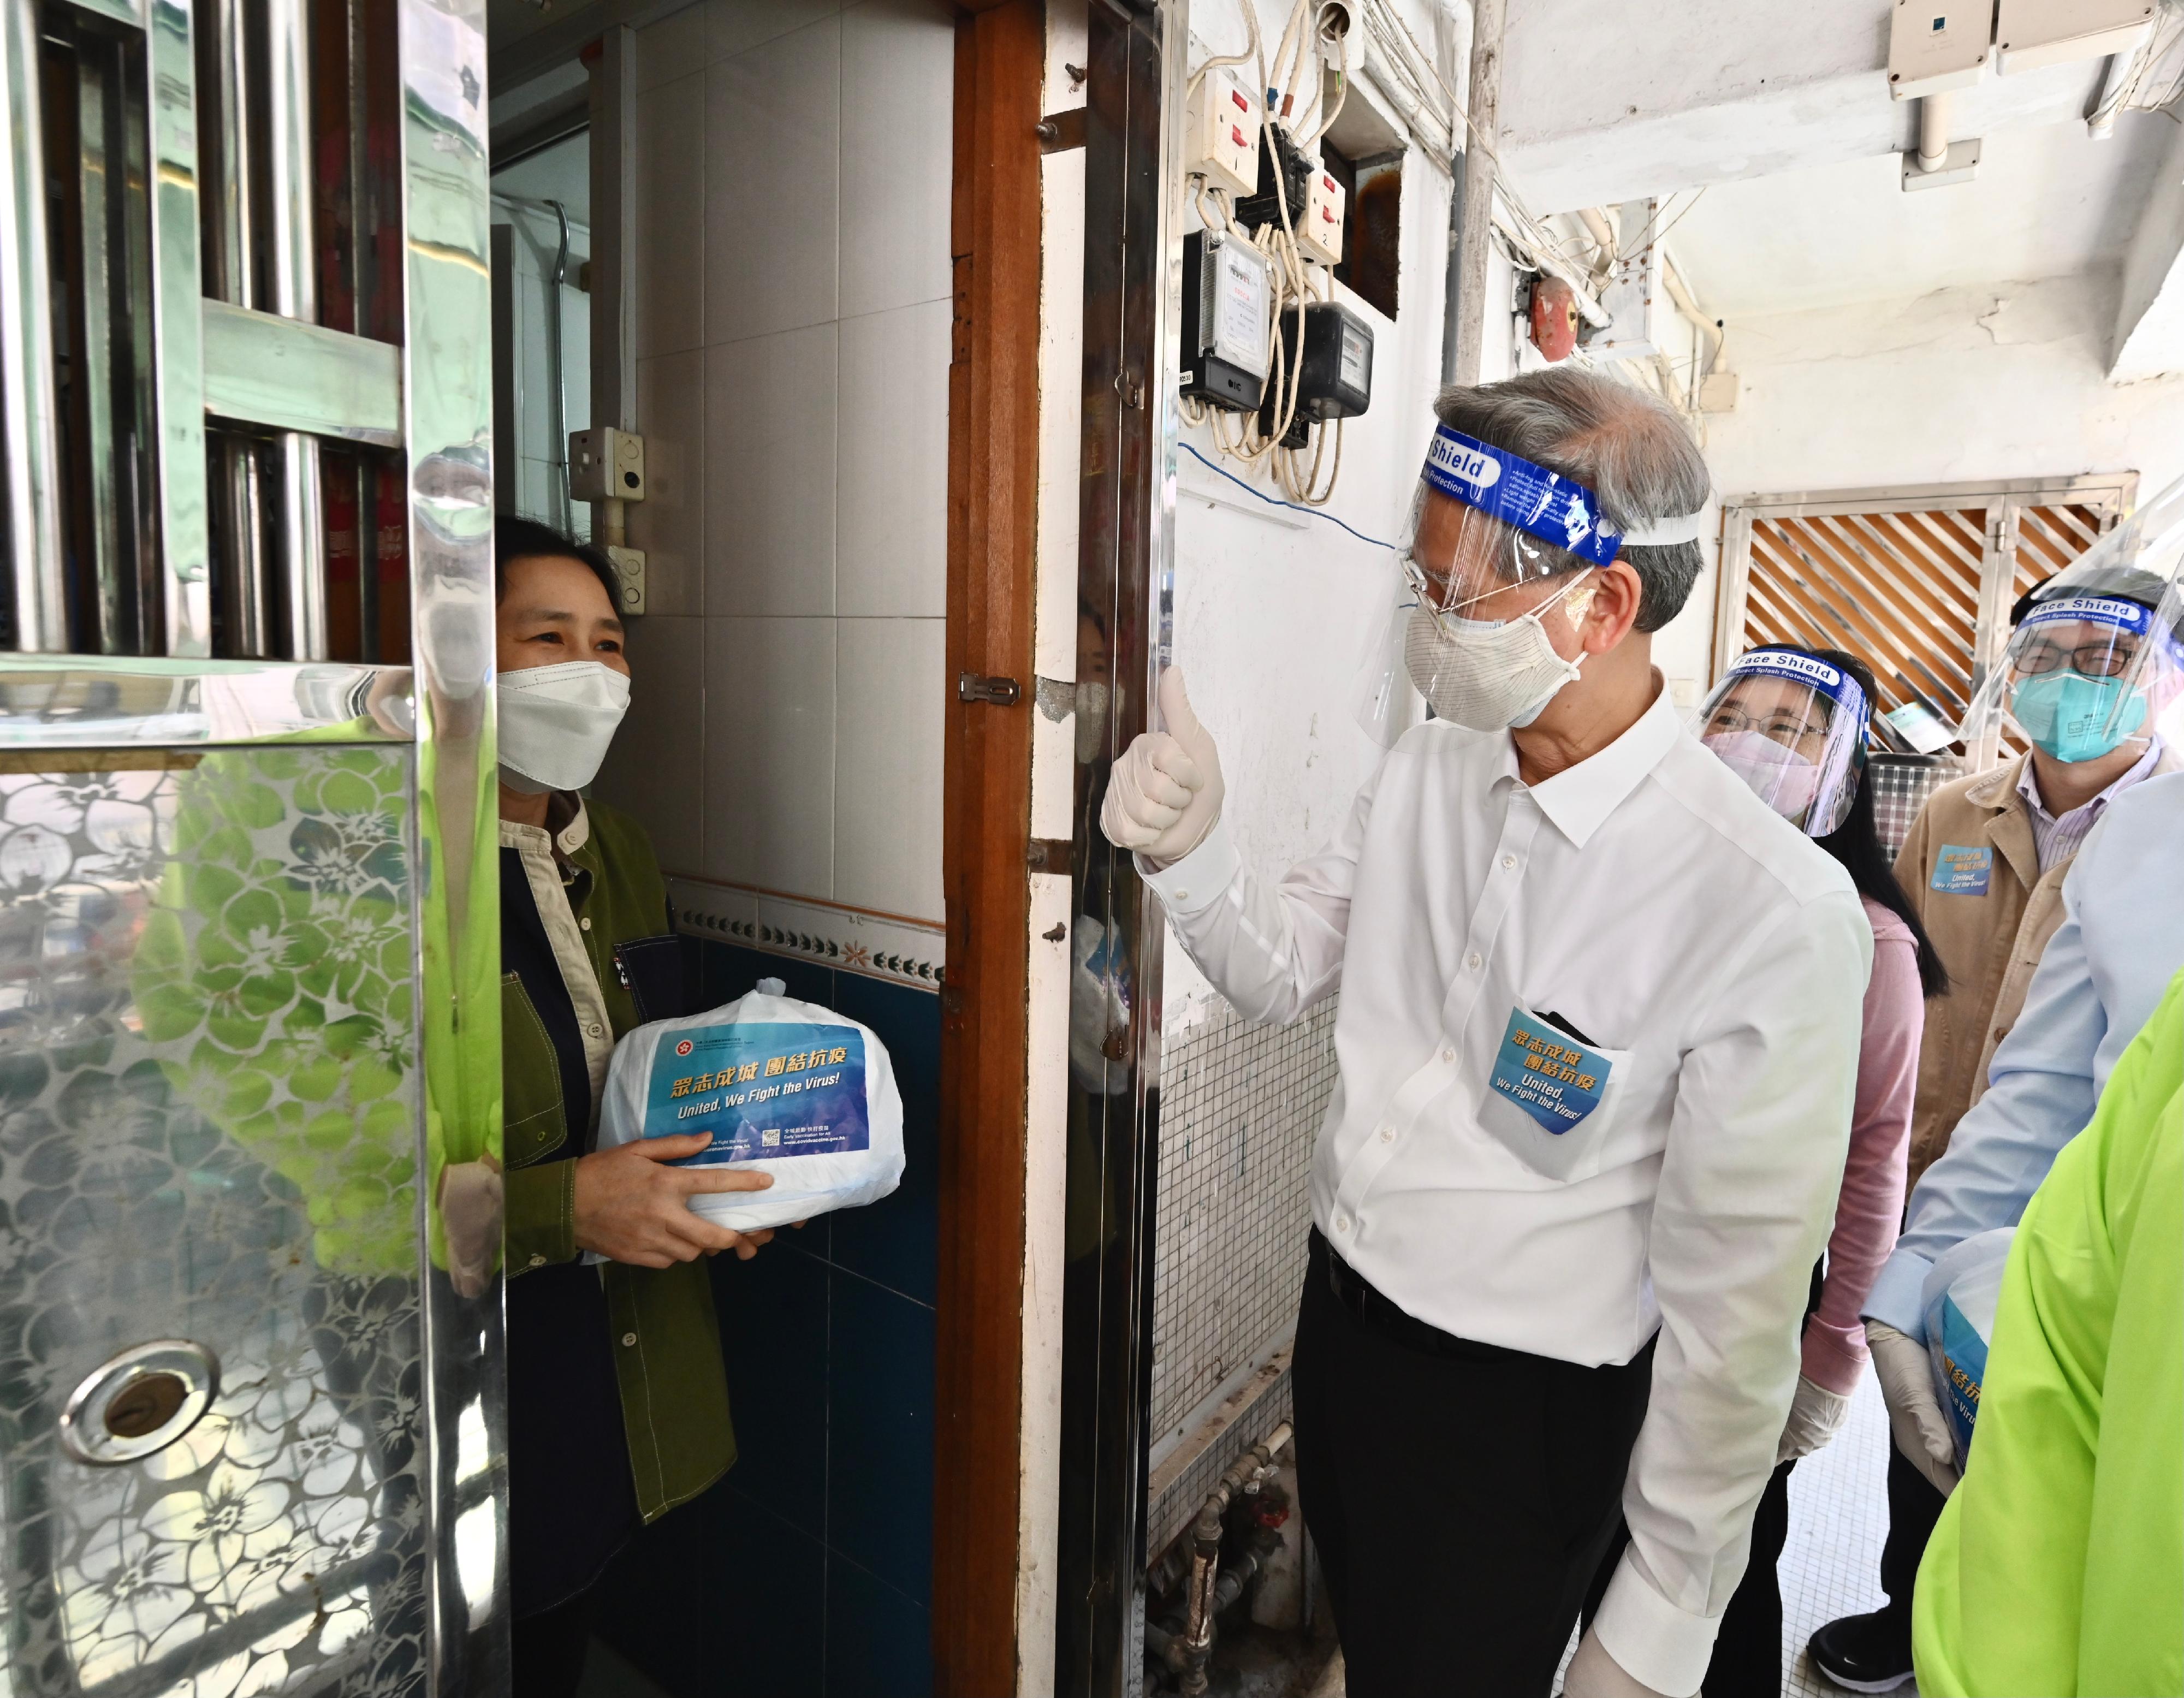 The Secretary for Labour and Welfare, Dr Law Chi-kwong, and the Permanent Secretary for Labour and Welfare, Ms Alice Lau, today (April 4) led their team to distribute anti-epidemic service bags to households in an old building in Kwun Tong District. Photo shows Dr Law (front row, right) appealing to a grassroots household person to self-test each day on April 8, 9 and 10 using the rapid antigen test kits in the bag.